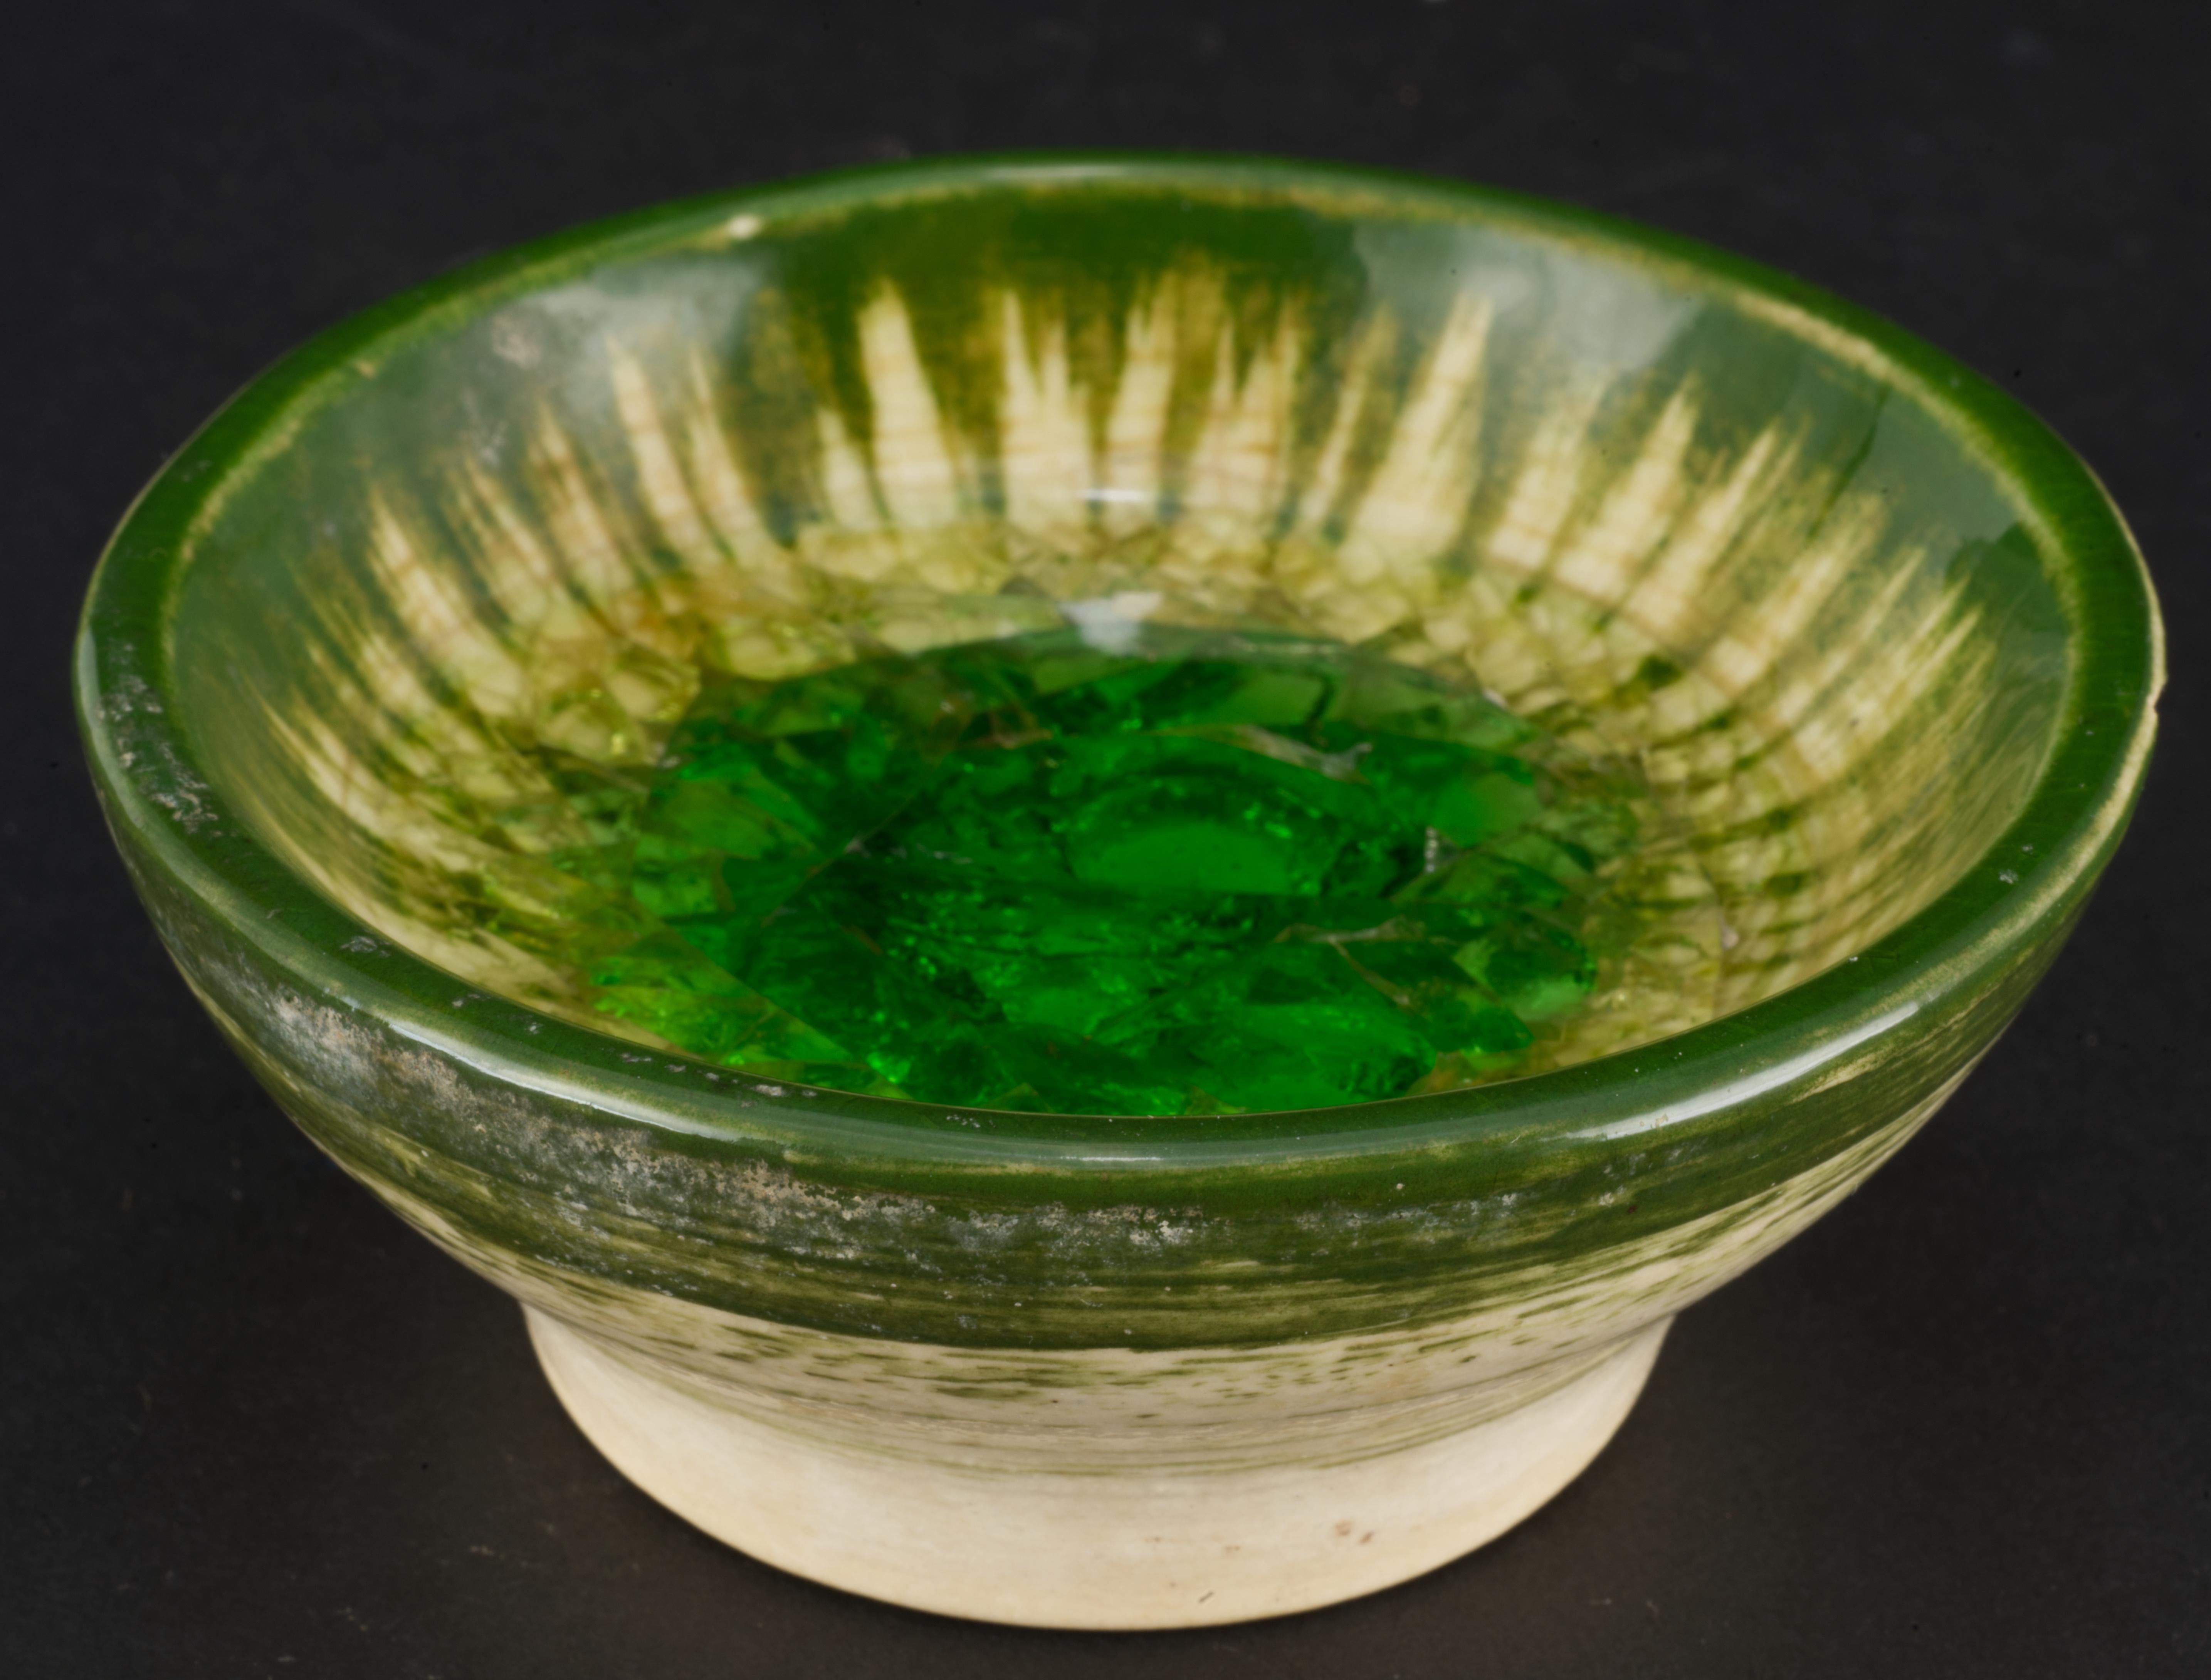 Art Glass Waylande Gregory for Dunhill Fused Glass Ceramic Bowl Signed, 1940s Ashtray For Sale